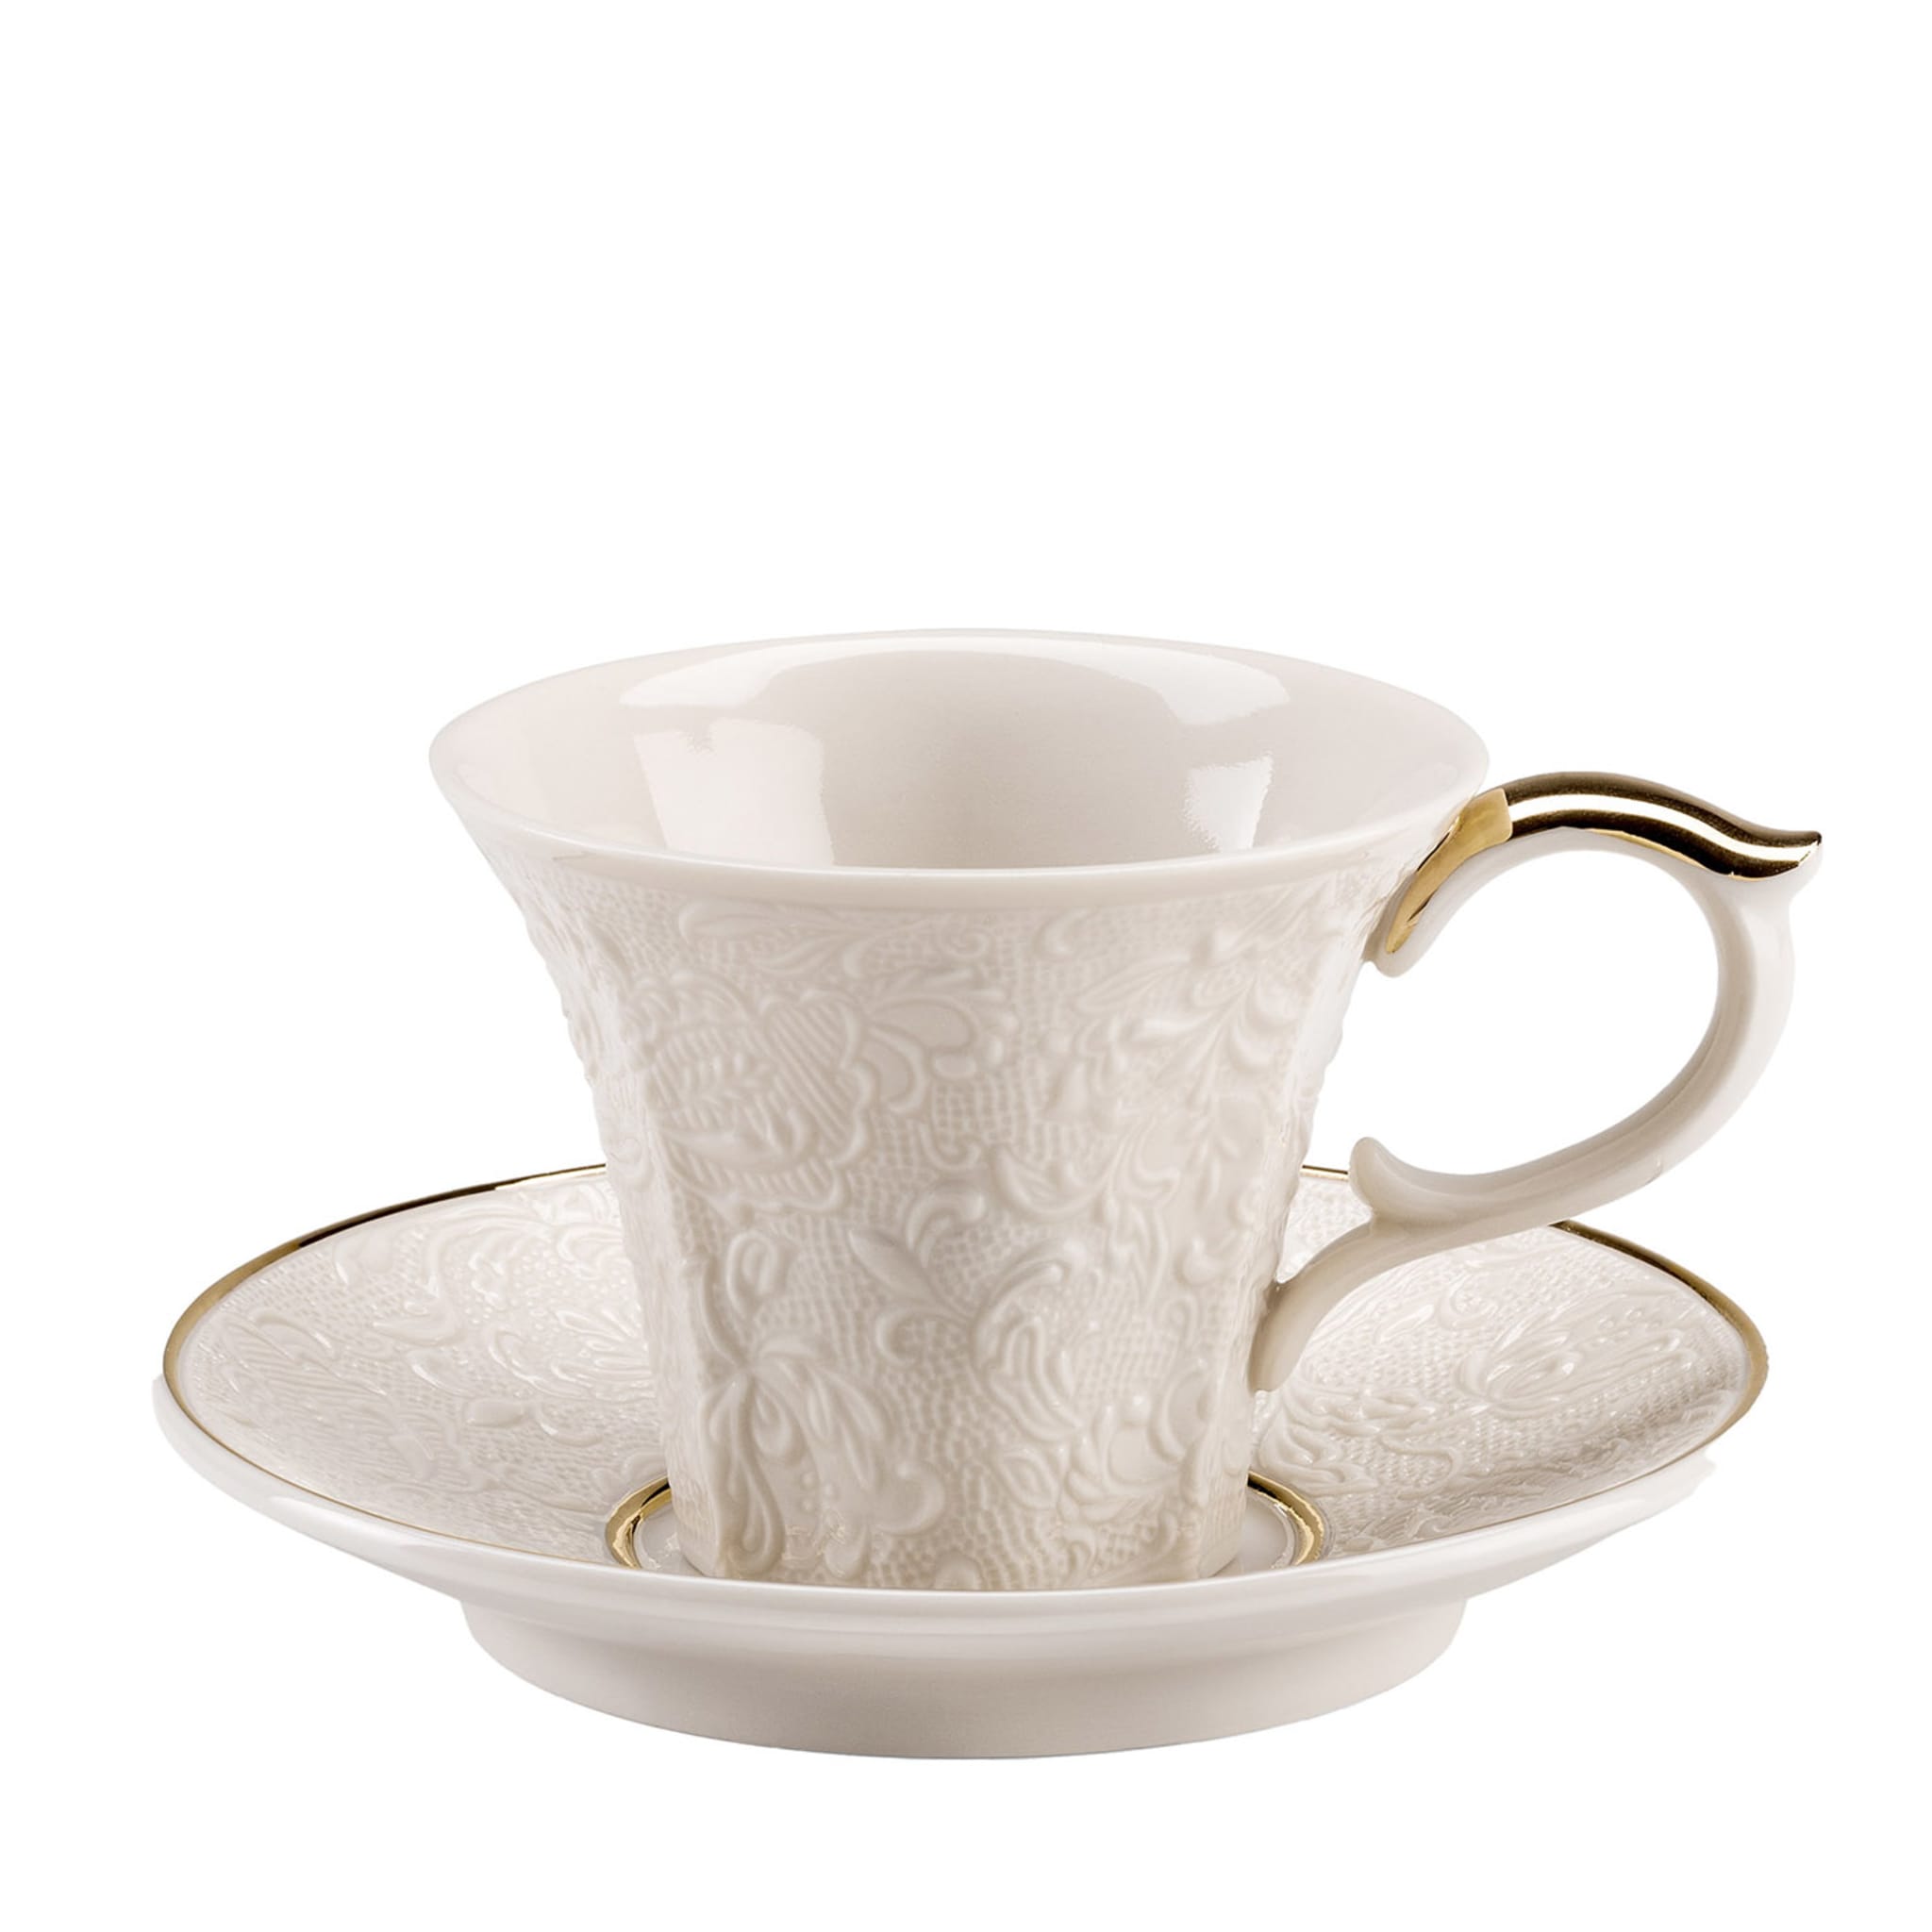 Damasco White & Gold Tea Cup with Saucer - Main view